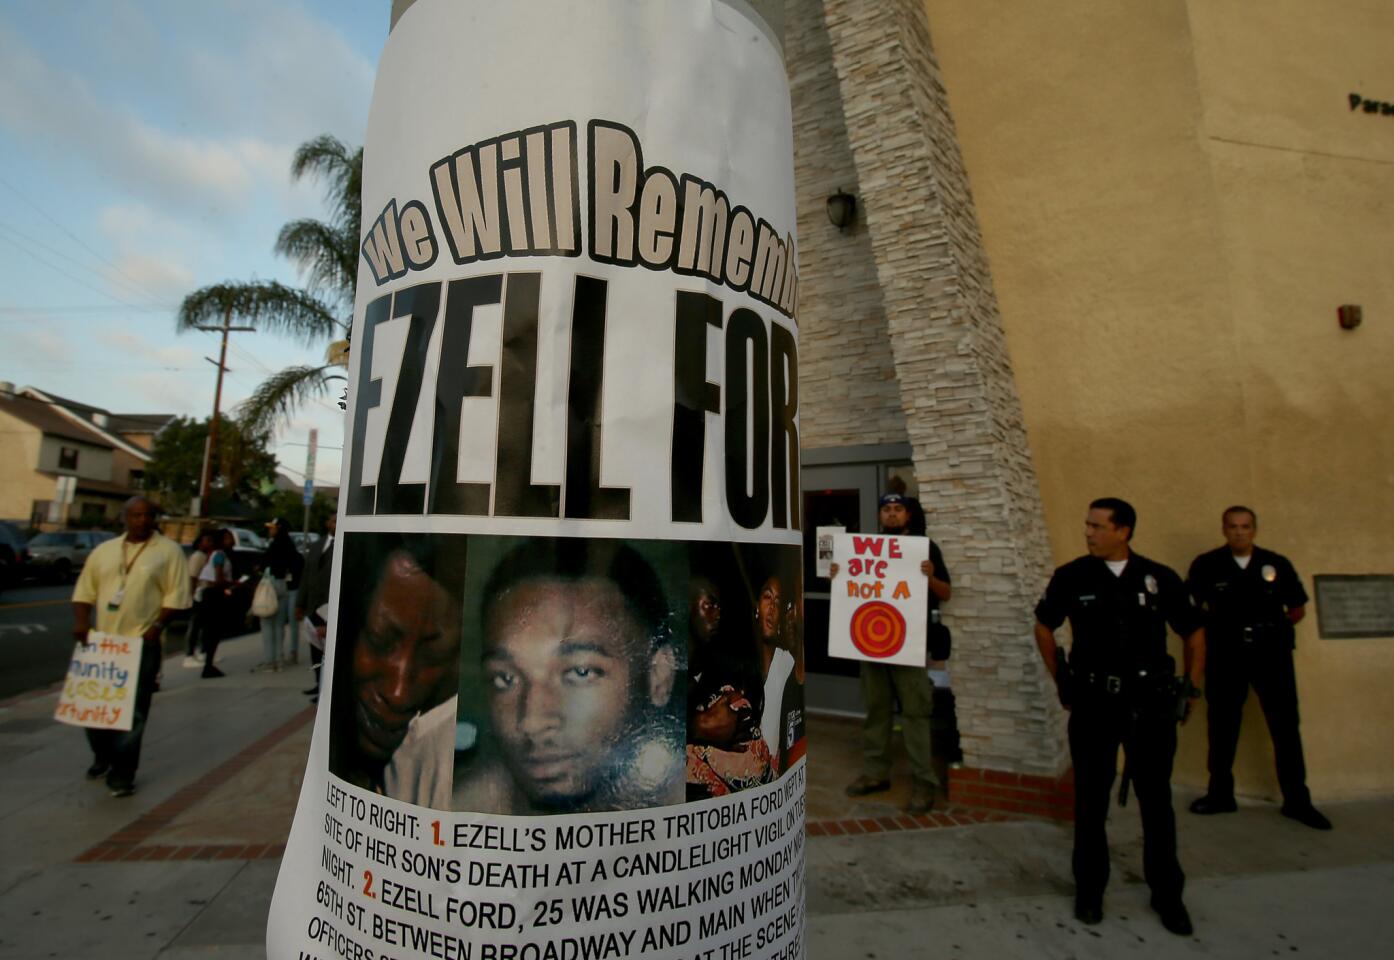 Looking back on the shooting death of Ezell Ford